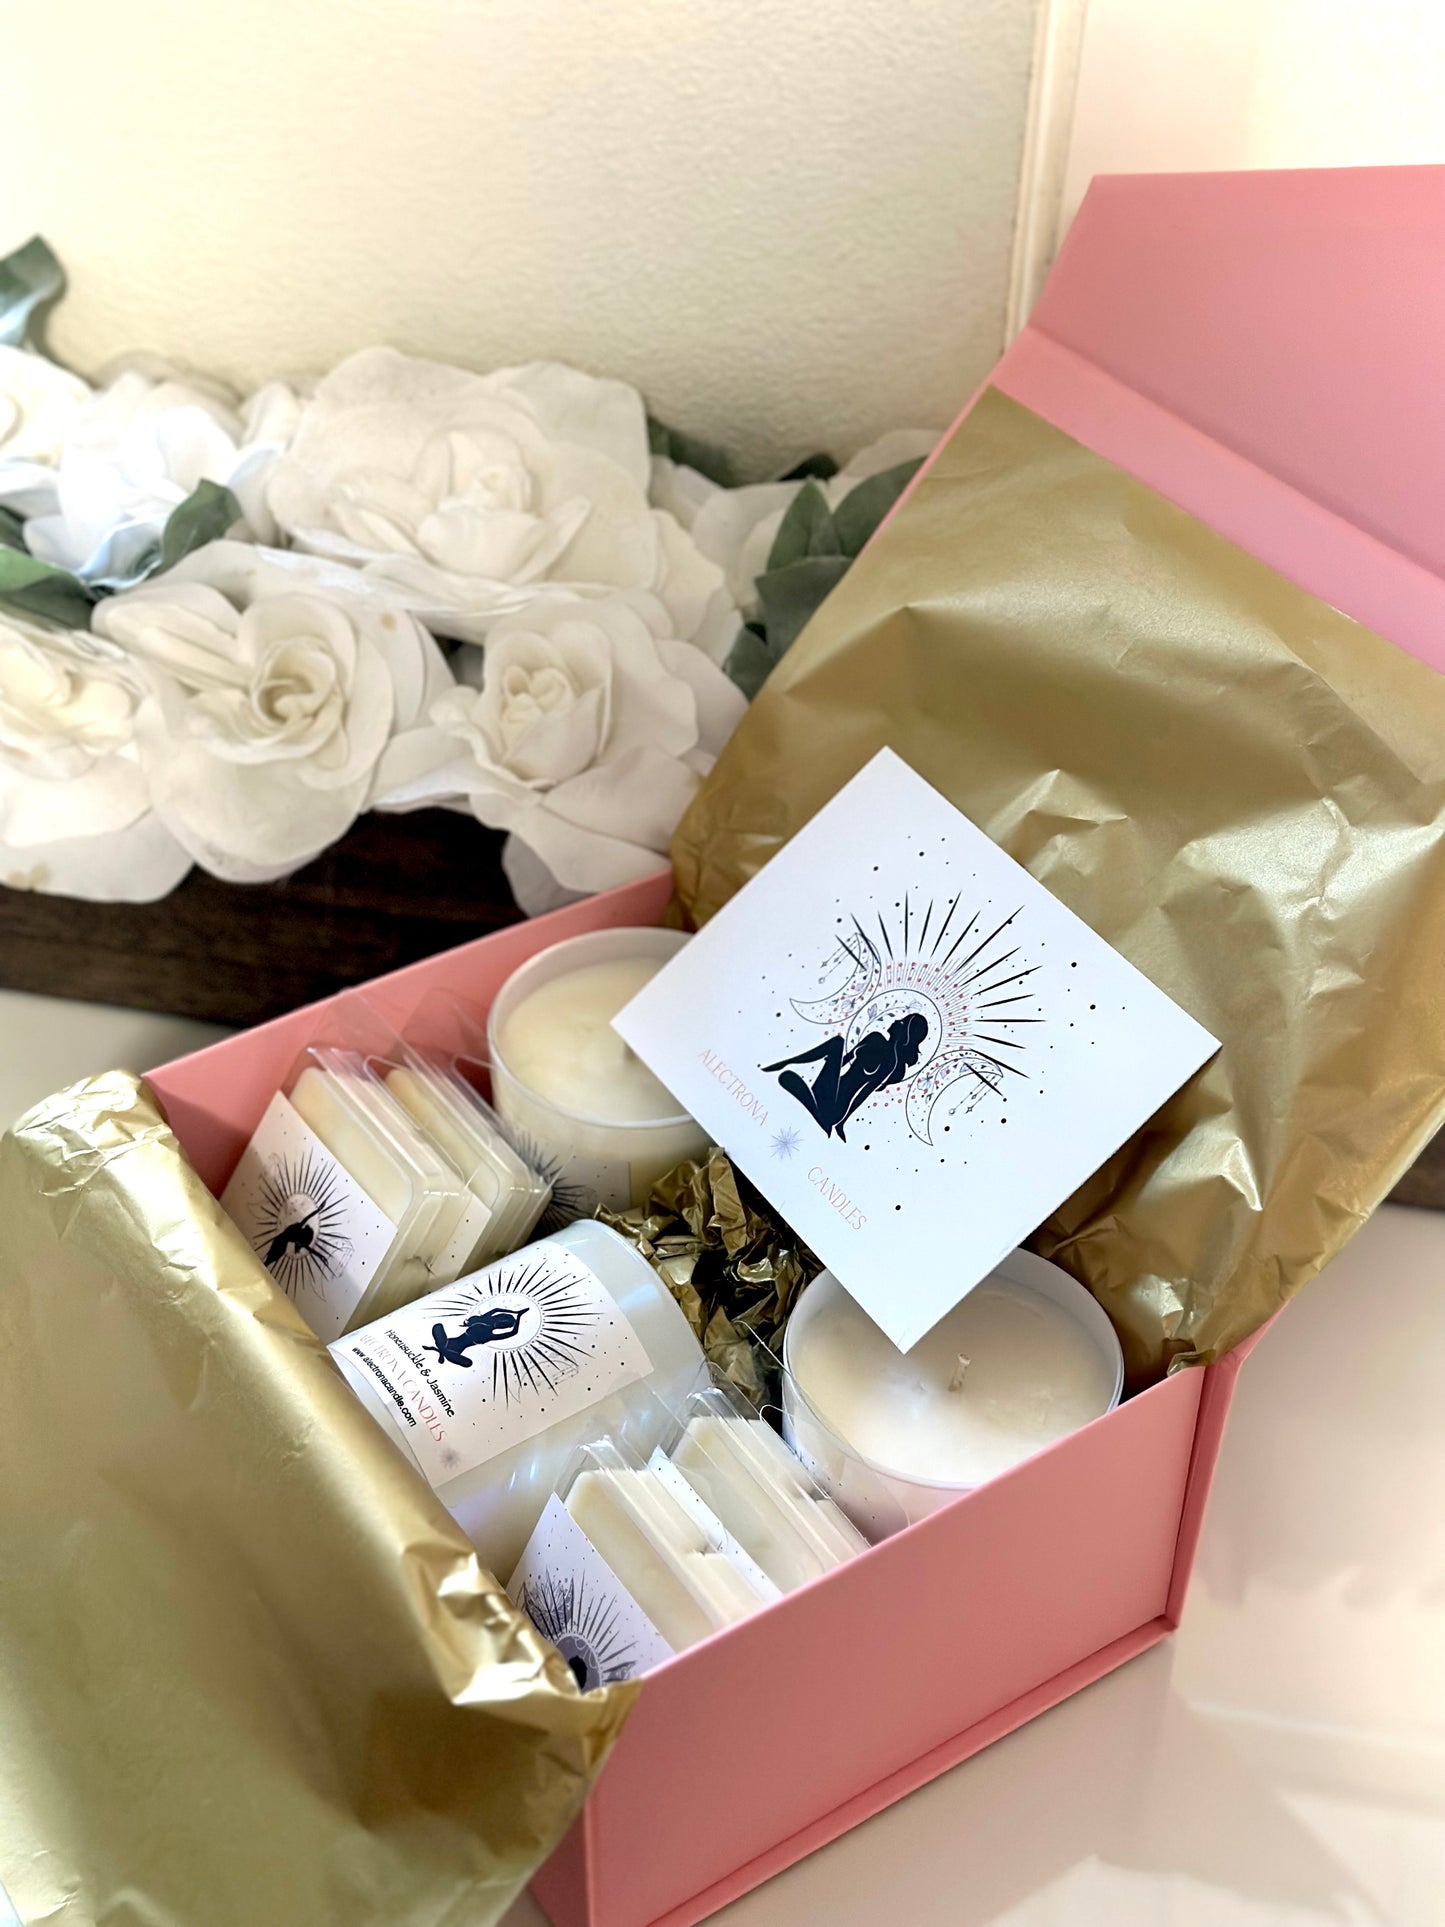 Candle and Melt Gift Box